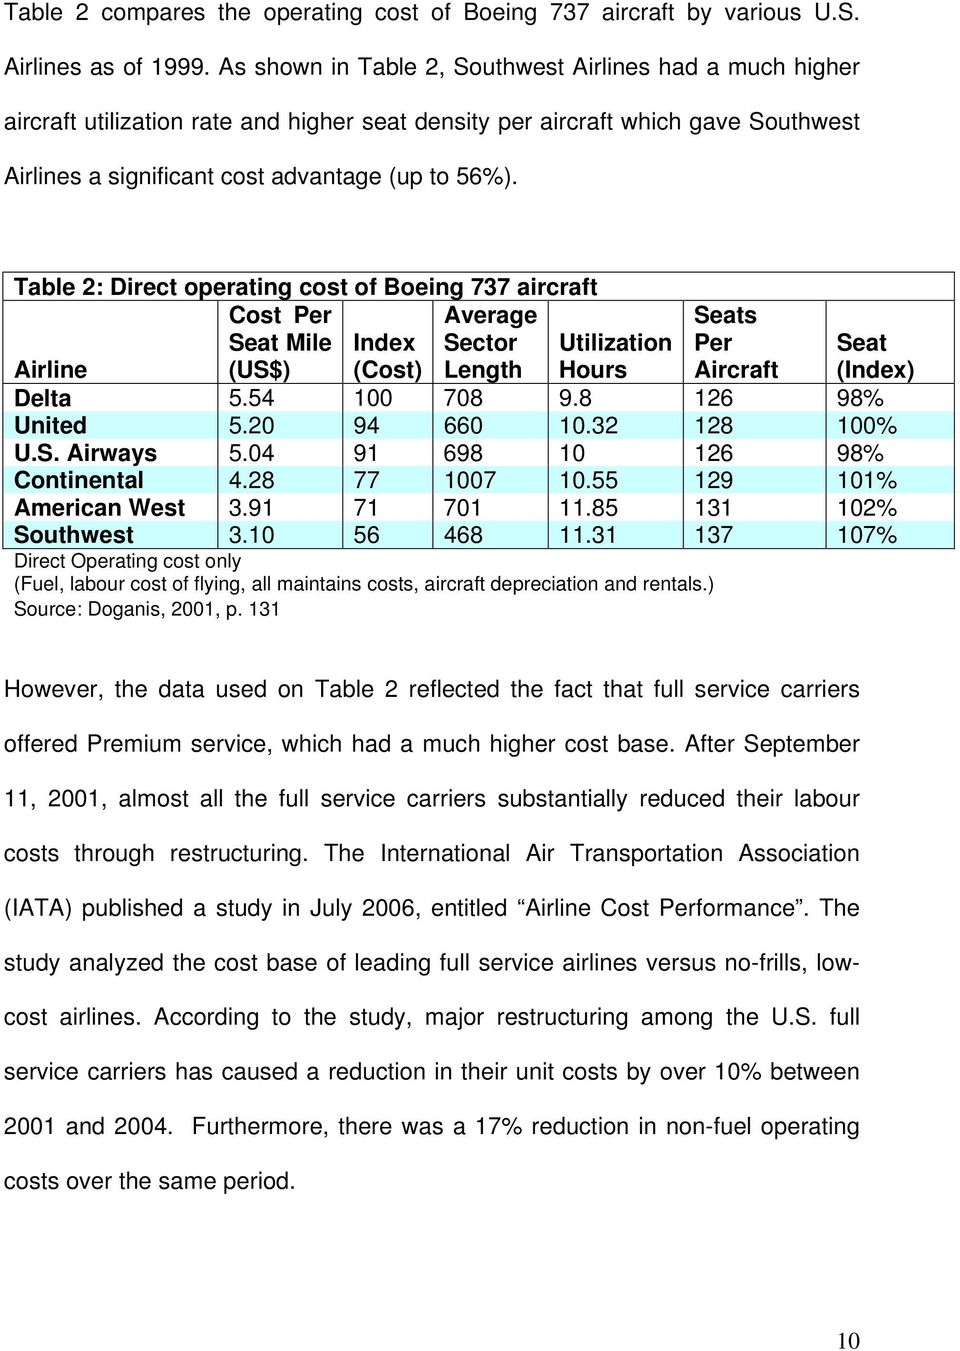 Table 2: Direct operating cost of Boeing 737 aircraft Airline Cost Per Seat Mile (US$) Index (Cost) Average Sector Length Seats Per Aircraft Utilization Hours Seat (Index) Delta 5.54 100 708 9.